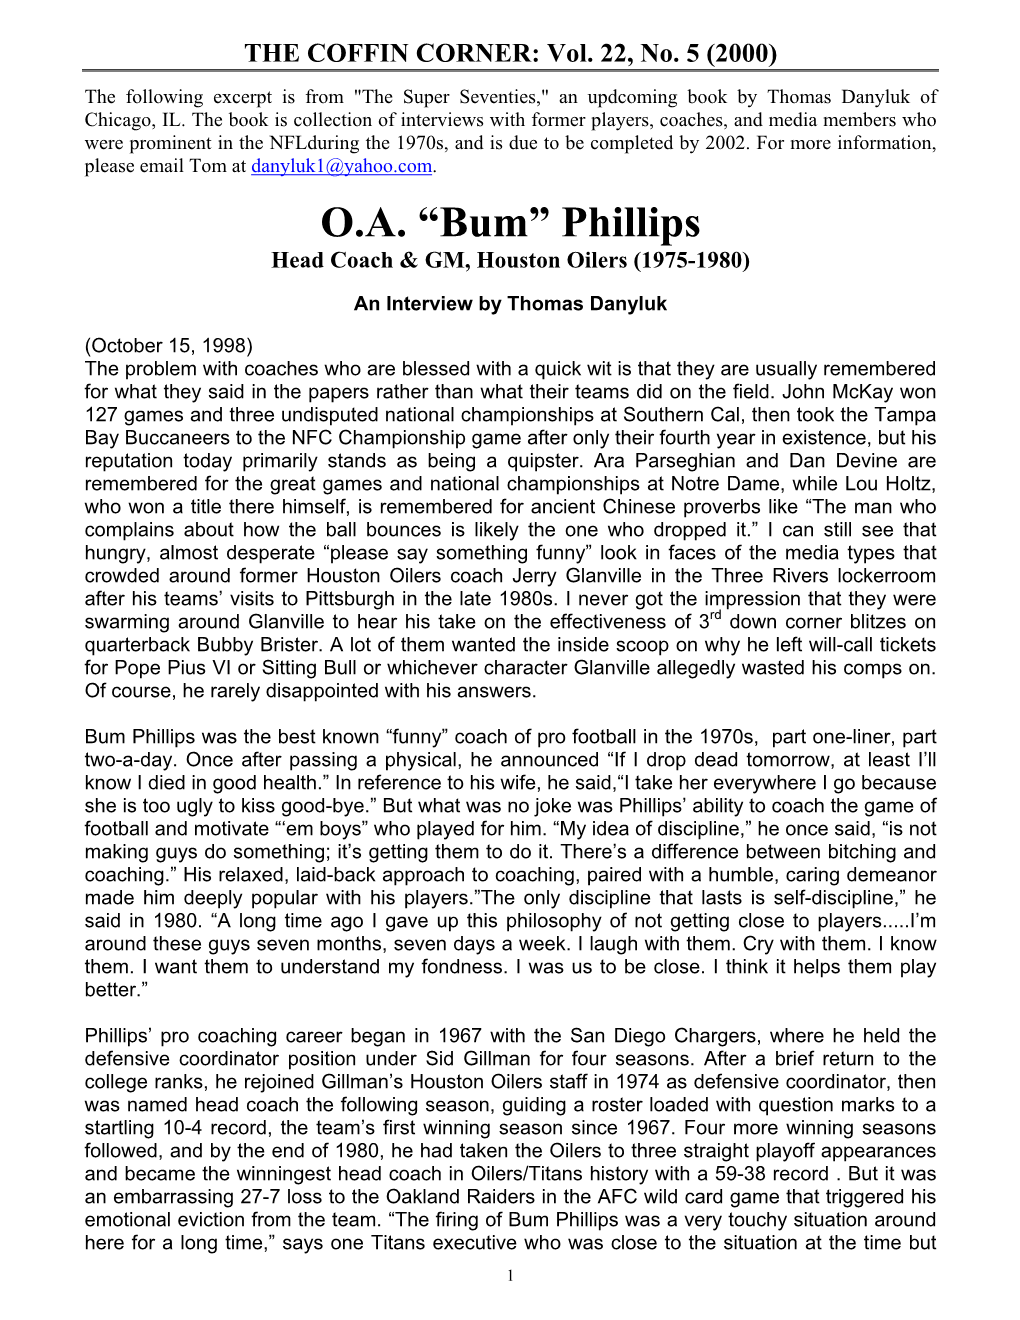 Bum Phillips Was the Best Known “Funny” Coach of Pro Football in the 1970S, Part One-Liner, Part Two-A-Day